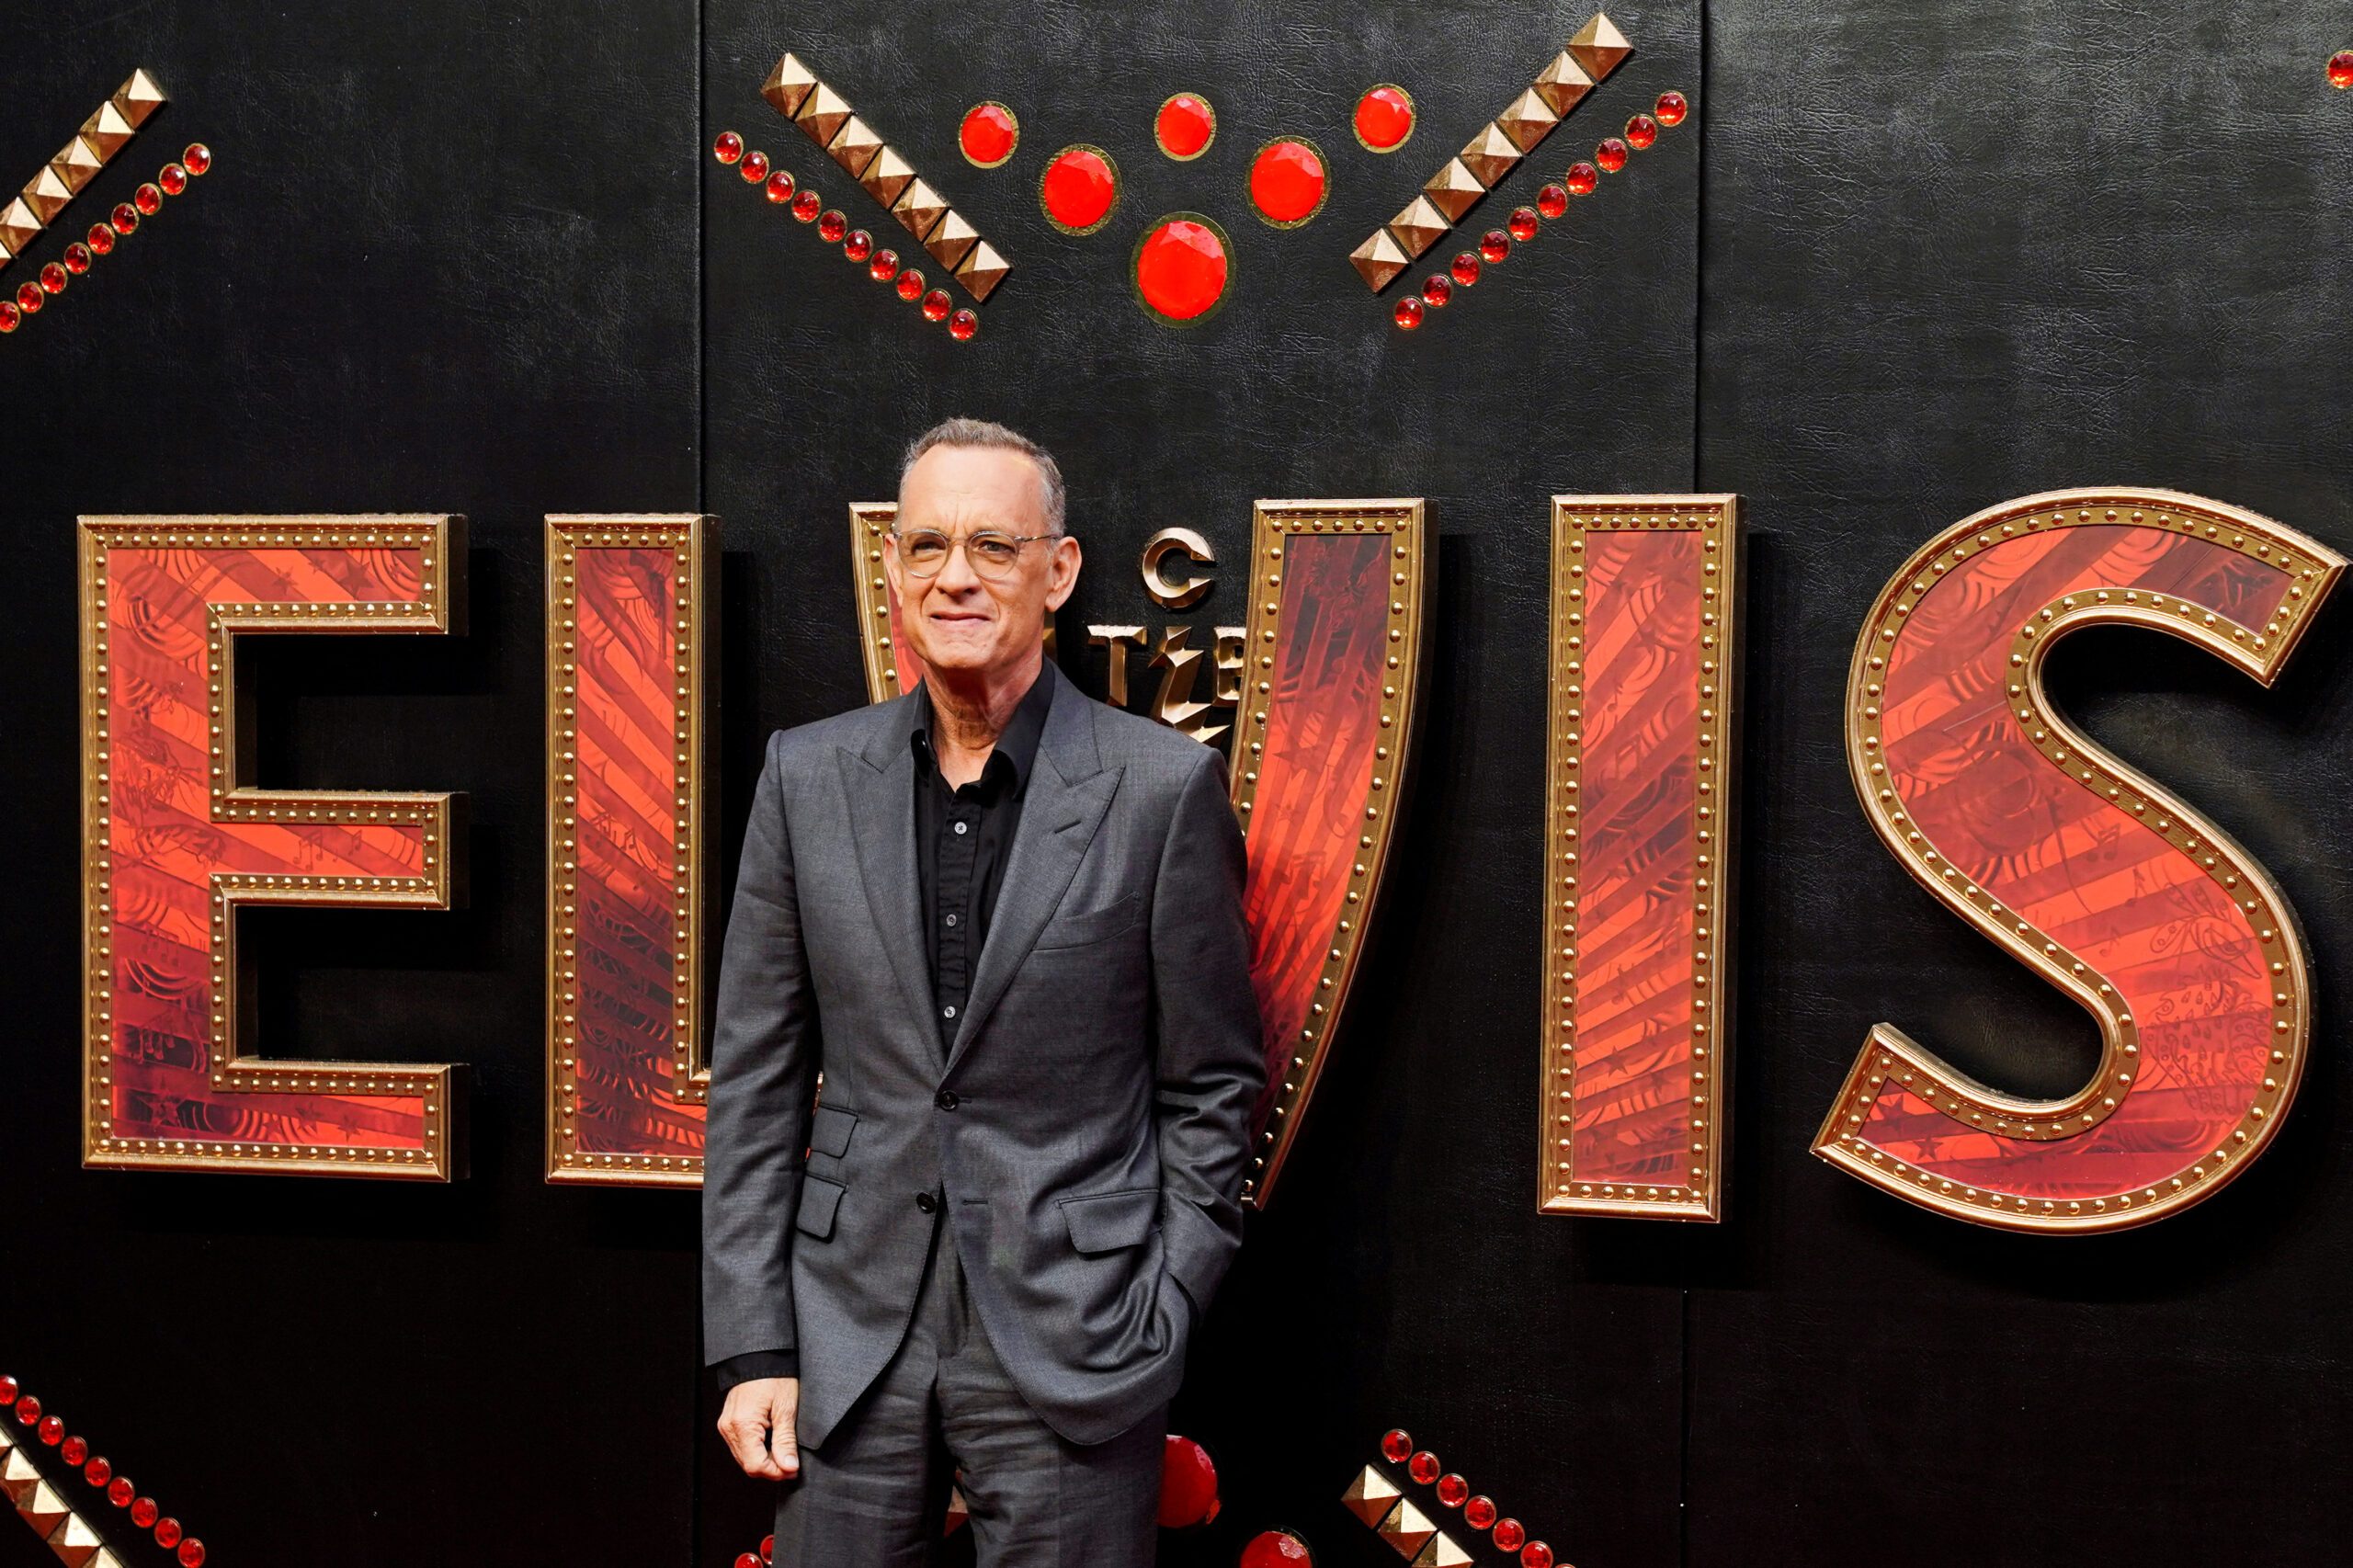 Tom Hanks is the best of the worst at the 2023 Razzies for ‘Elvis’ role